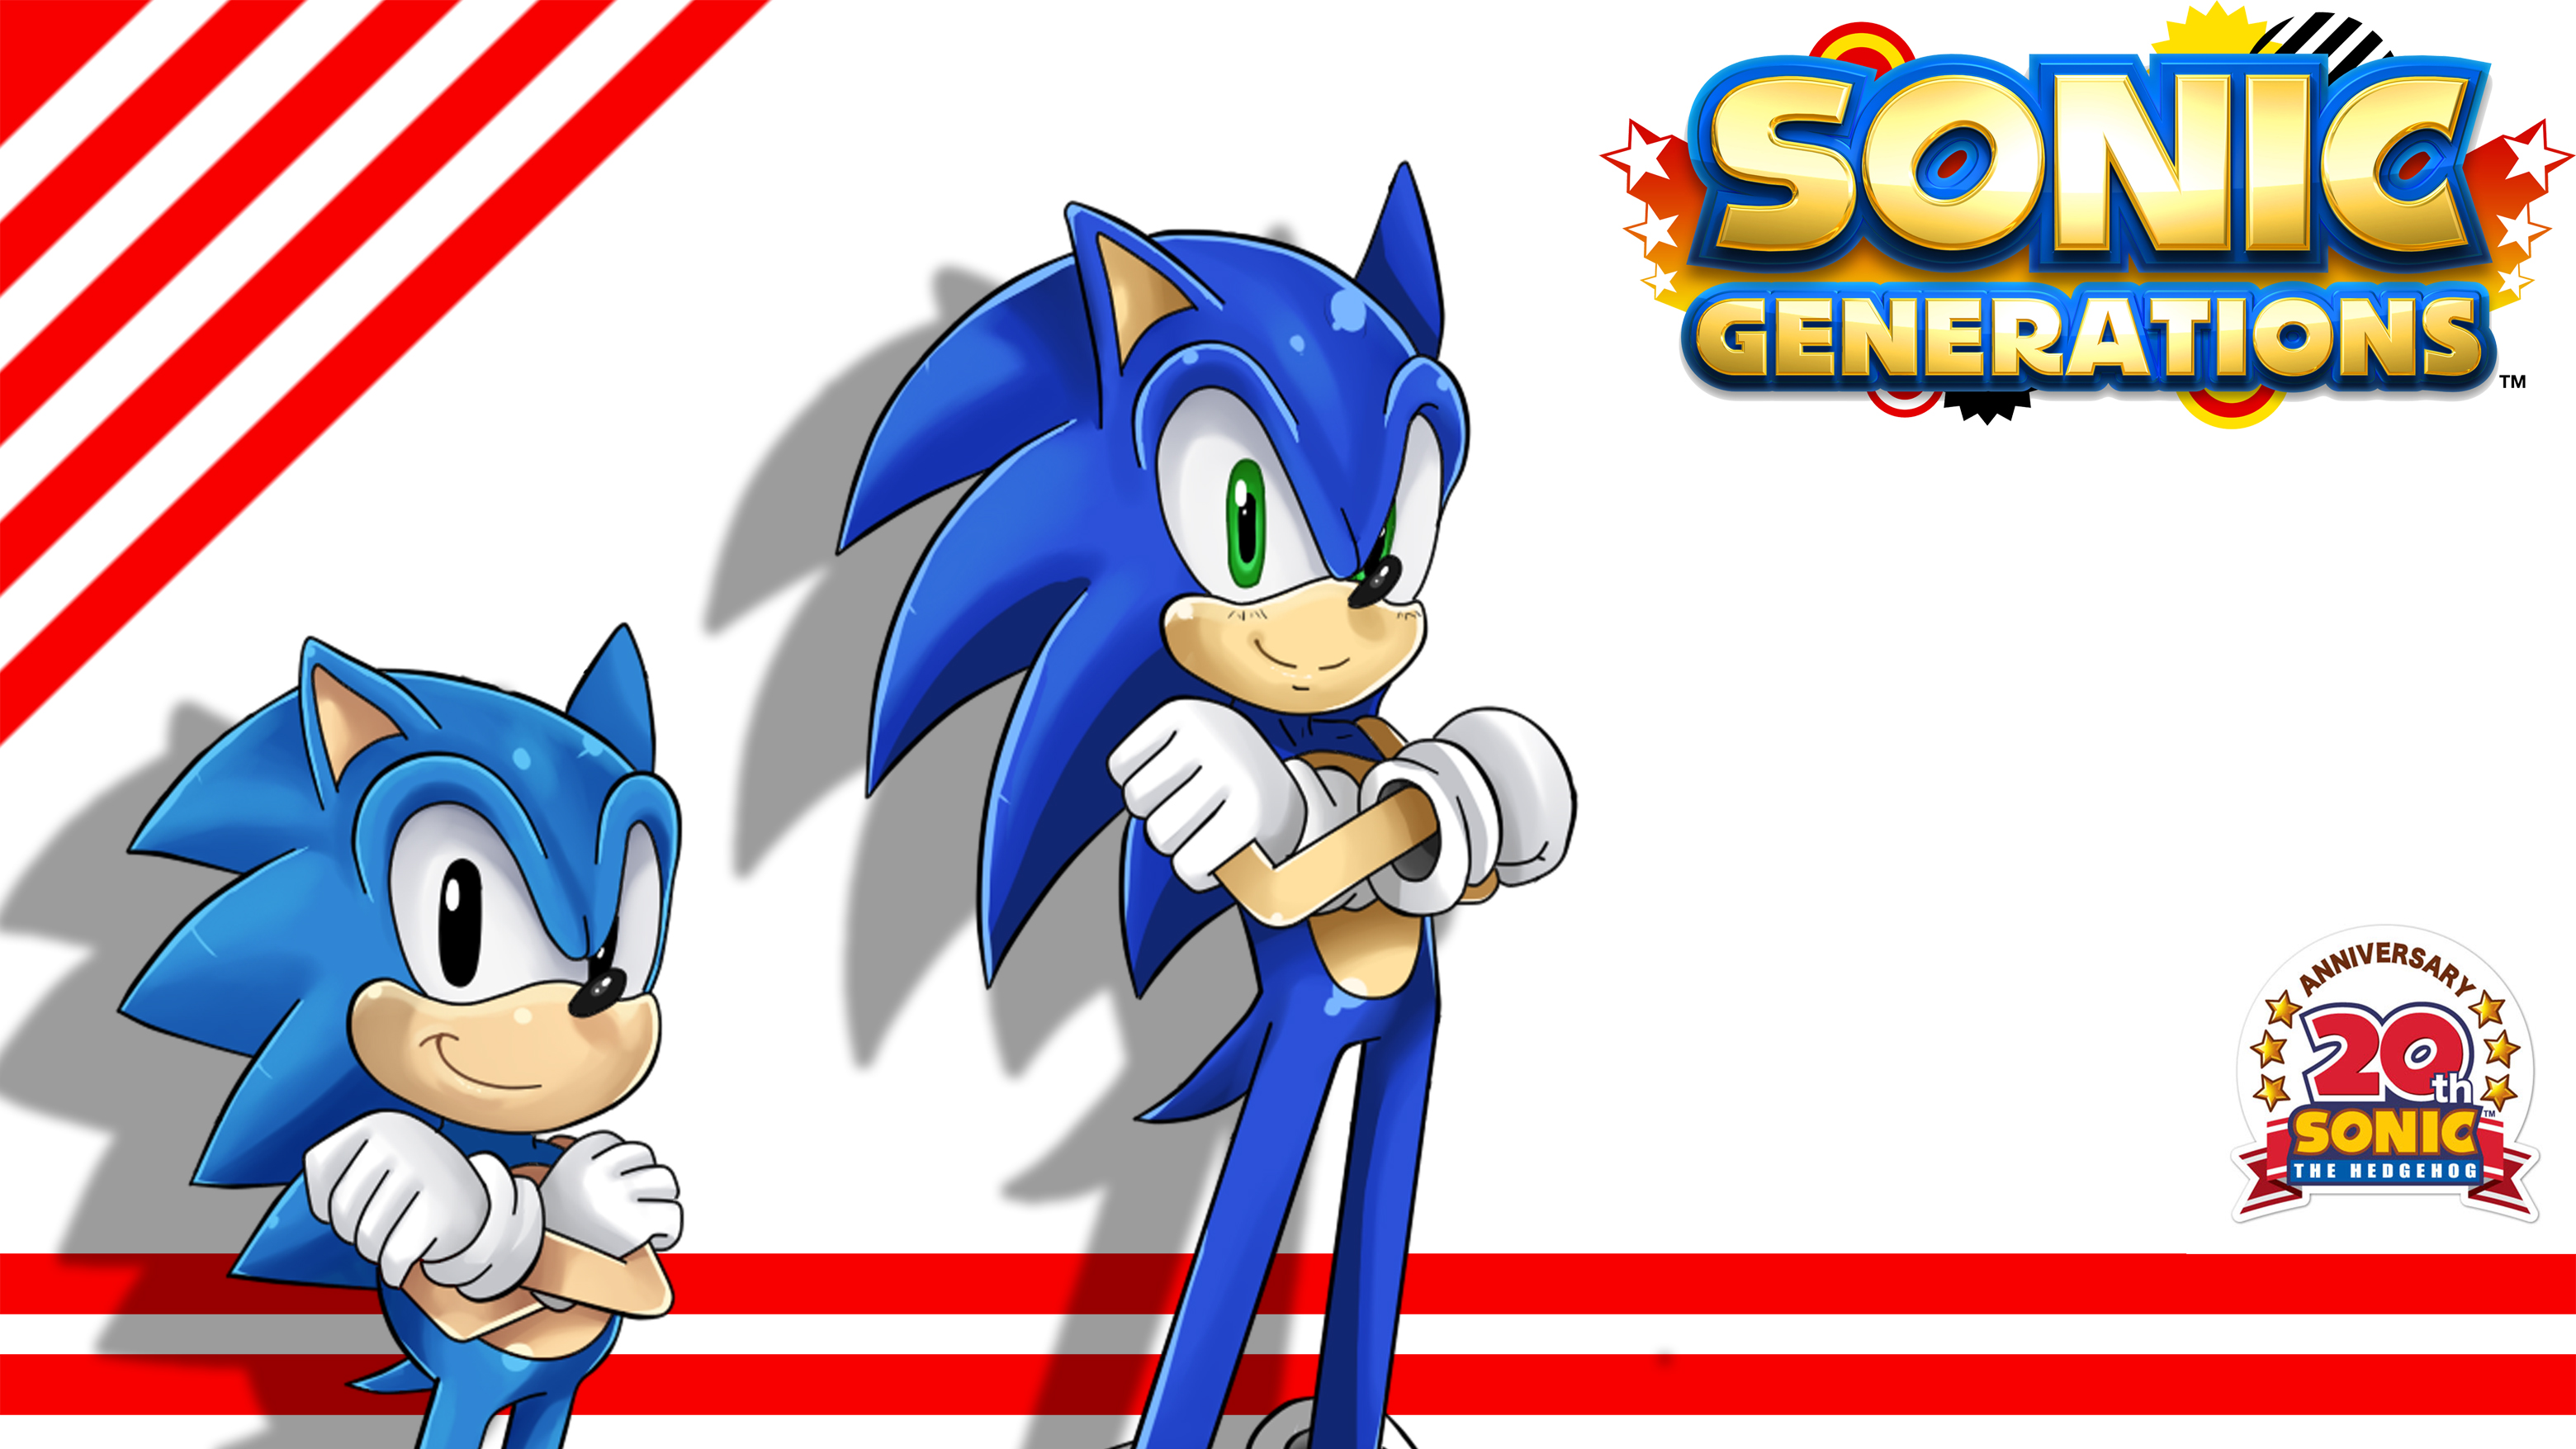 video game, sonic generations, classic sonic, sonic the hedgehog, sonic